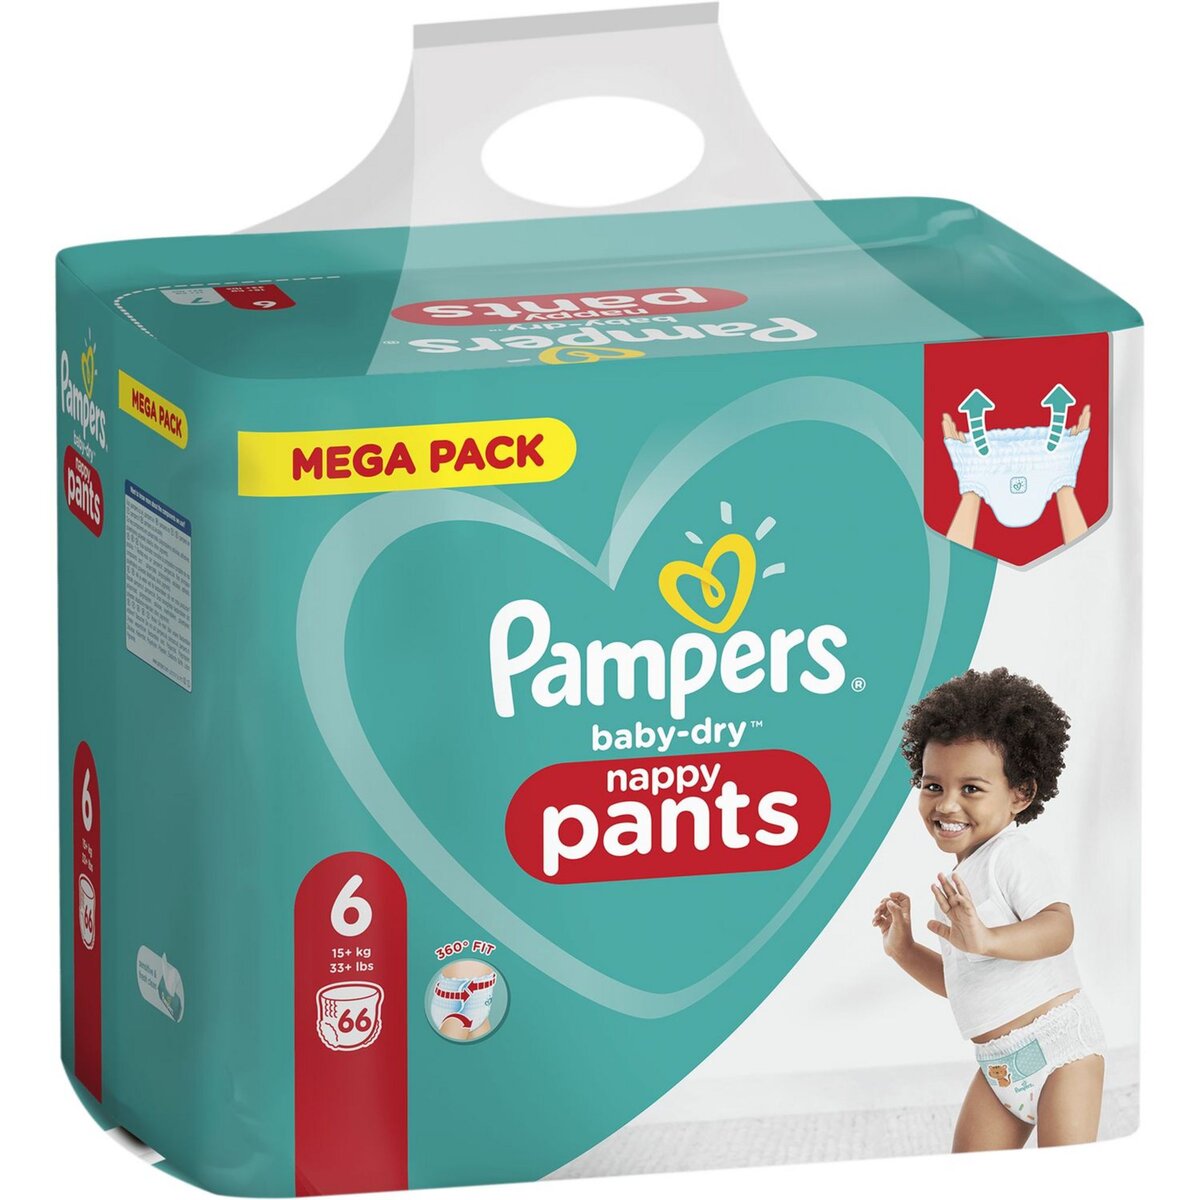 Pampers Couches-Culottes Taille 6 (15+ kg), Baby-Dry, 116 Couches